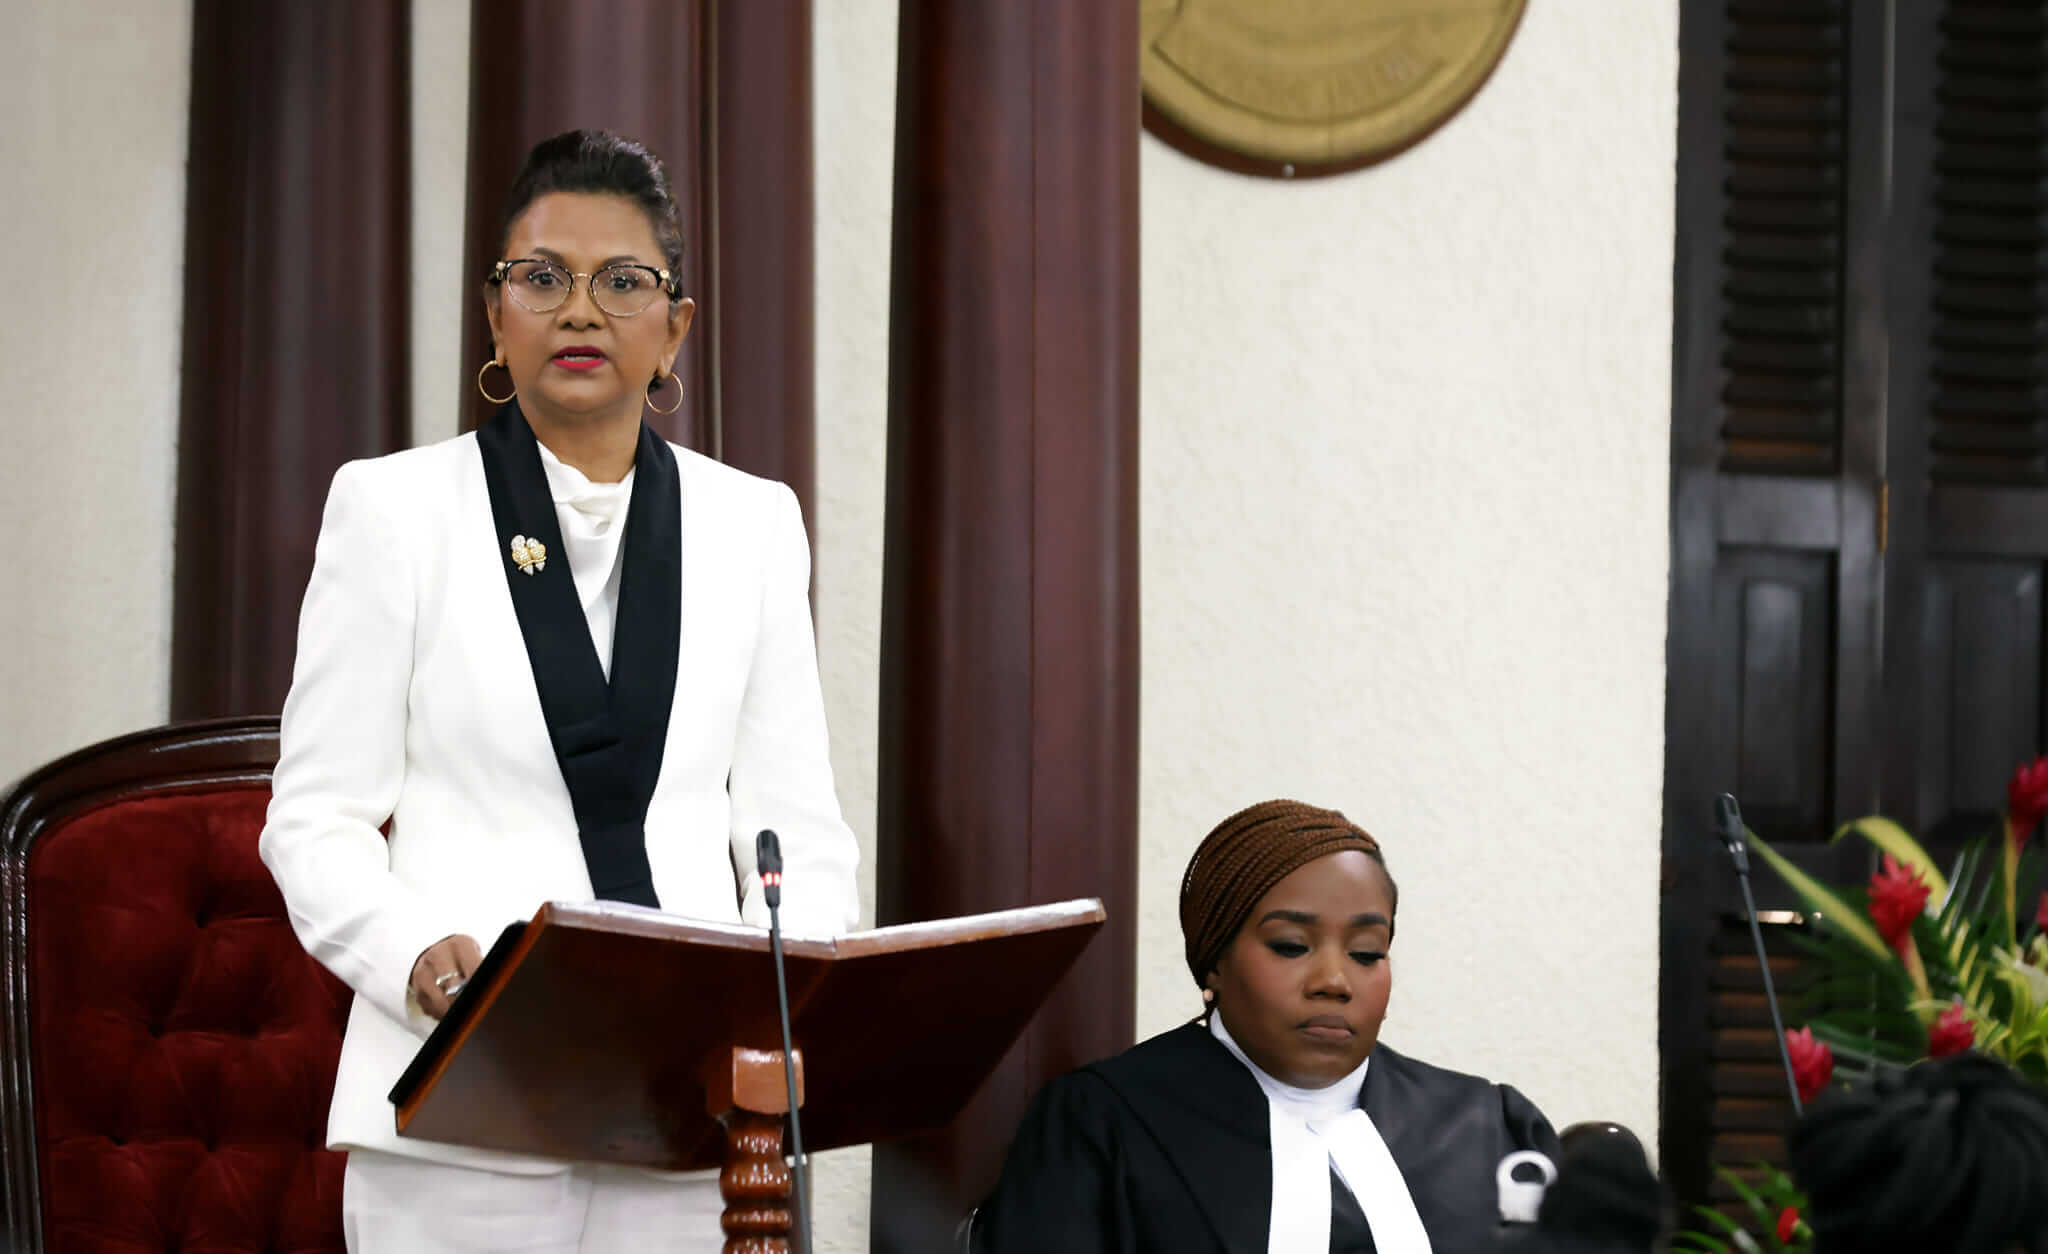 Address by Her Excellency Christine Carla Kangaloo O.R.T.T., President of the Republic of Trinidad and Tobago at the Tobago House of Assembly